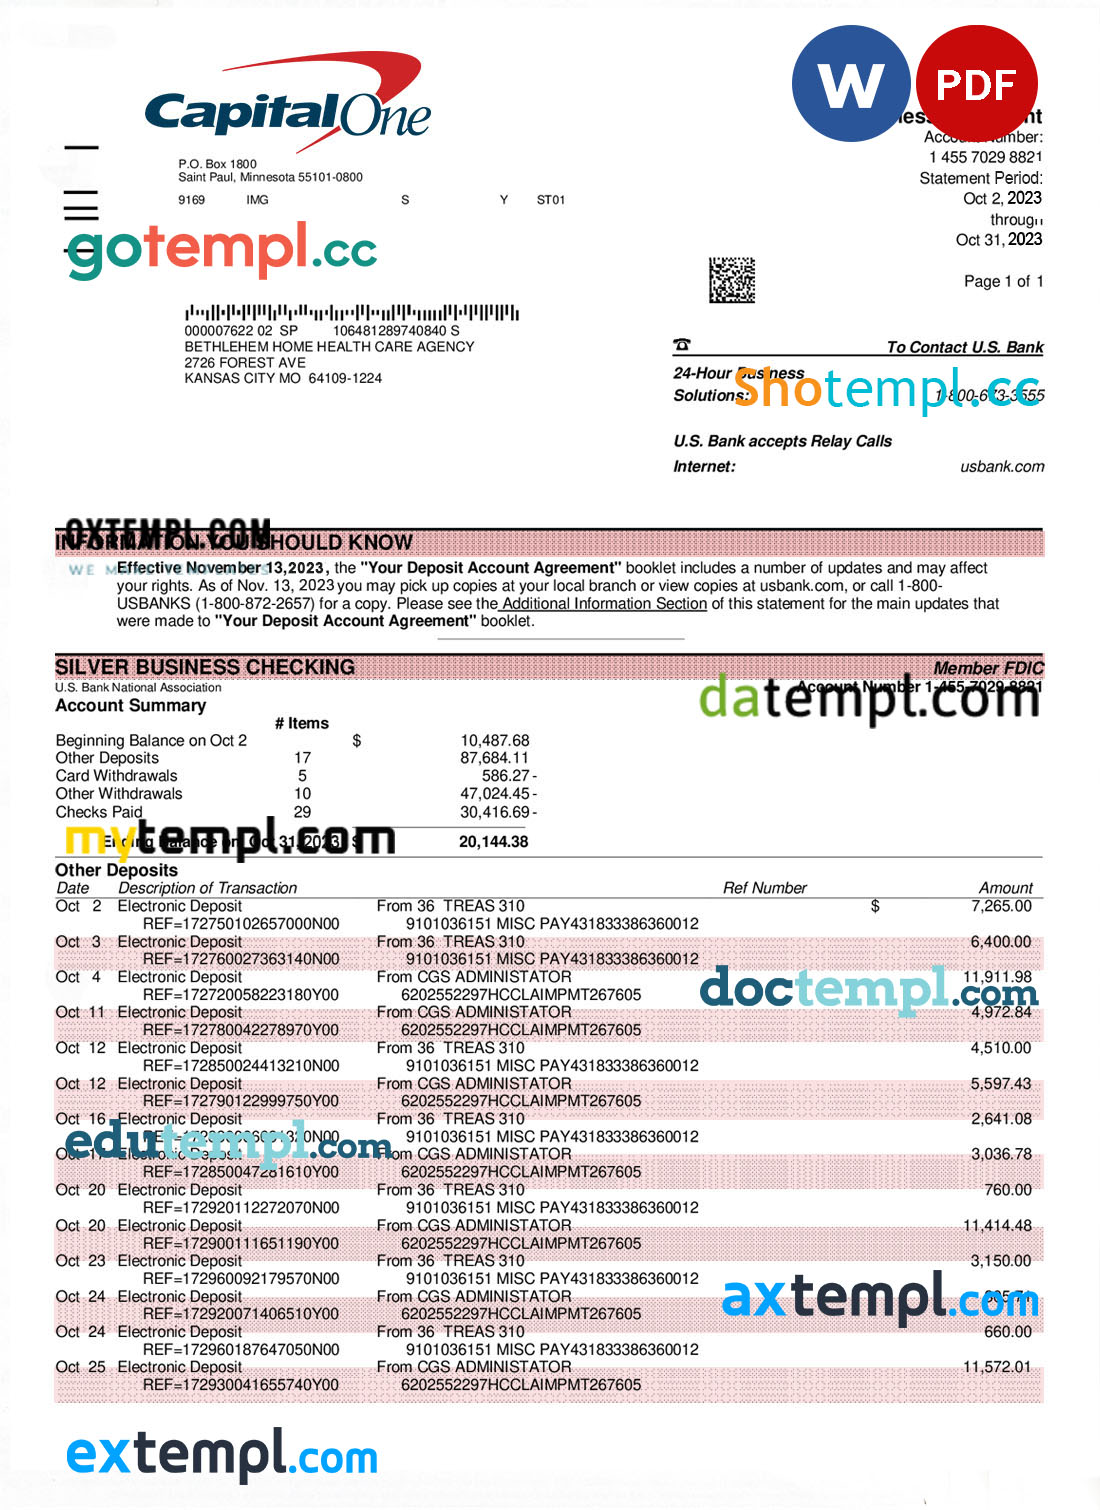 Capital One bank corporate account statement Word and PDF template